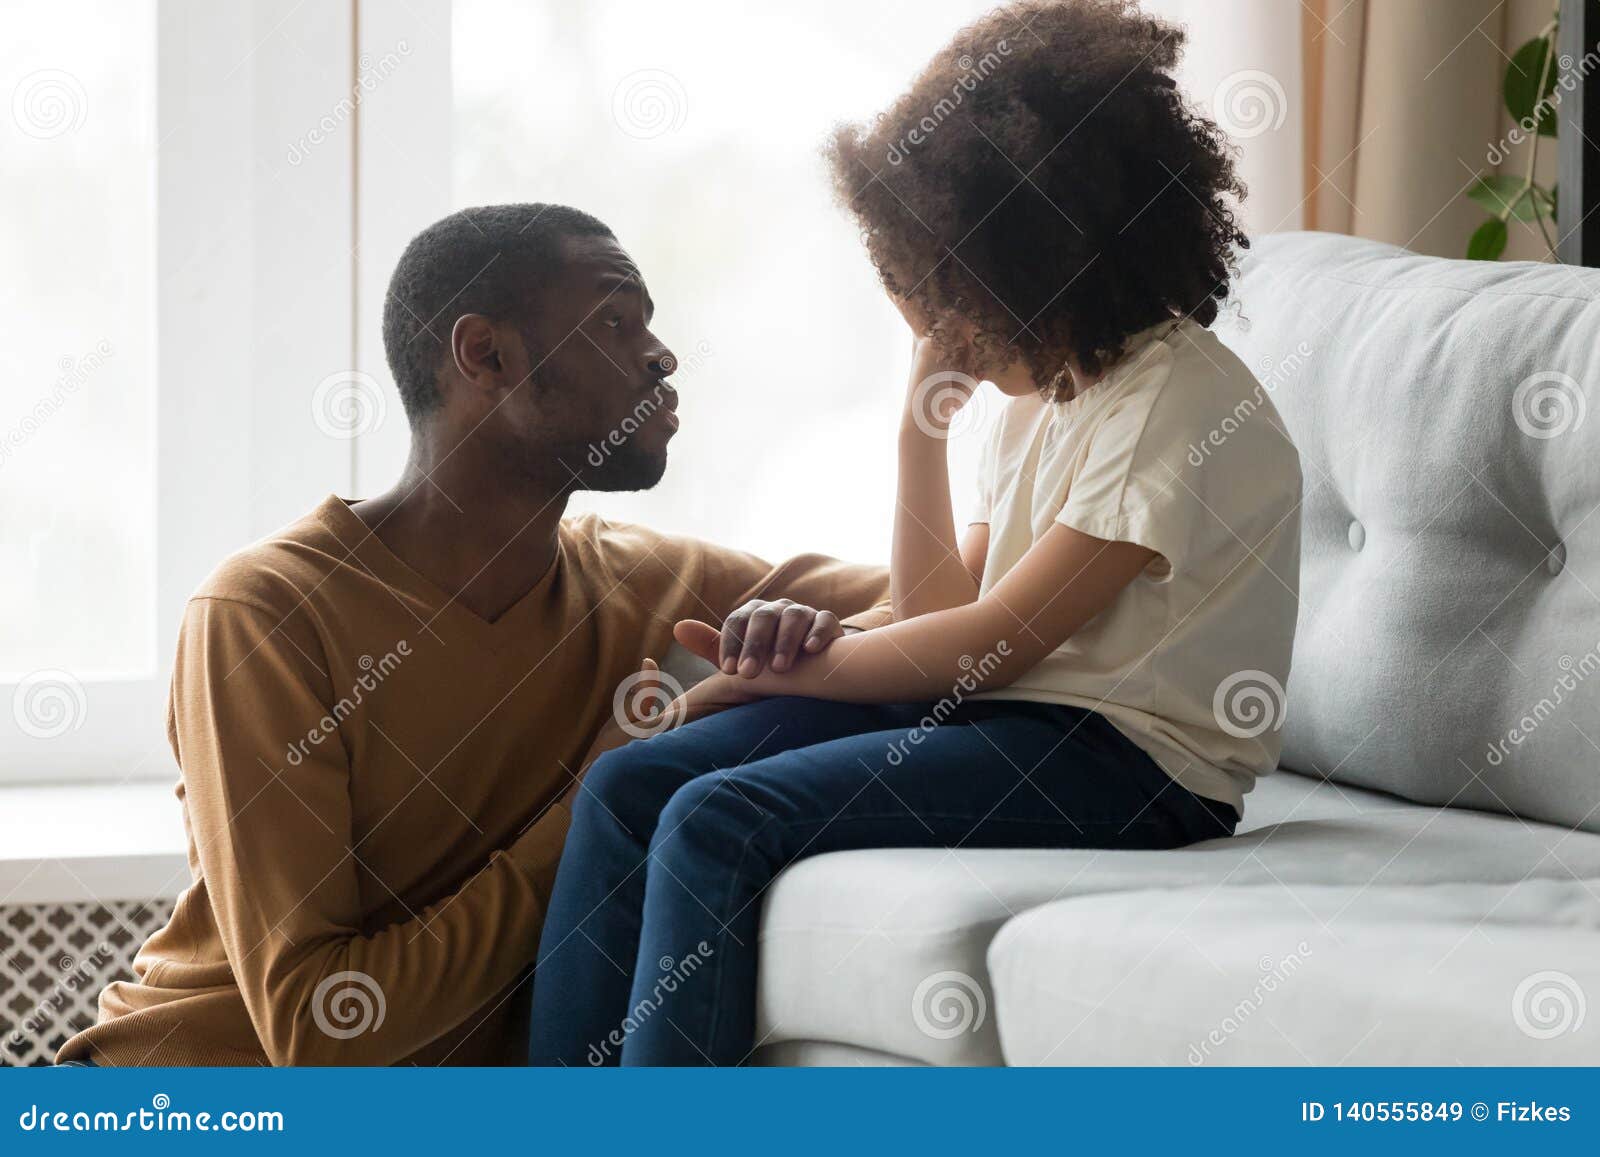 loving african dad comforting crying kid daughter showing empathy